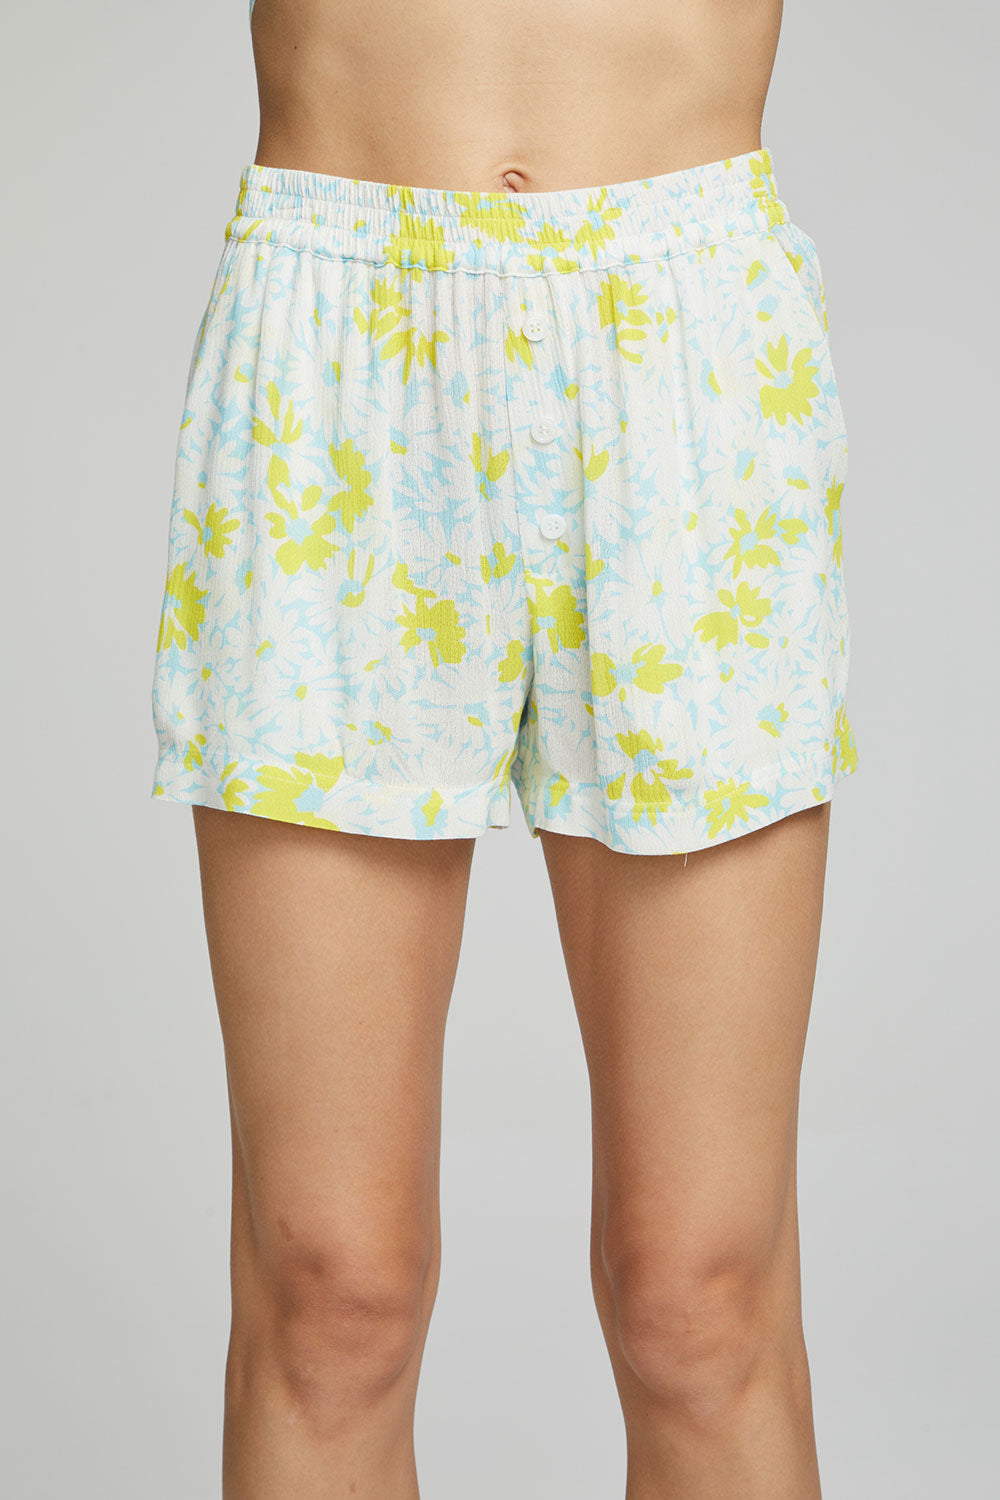 Ollie Boxer Shorts - Daisy Floral Print WOMENS chaserbrand